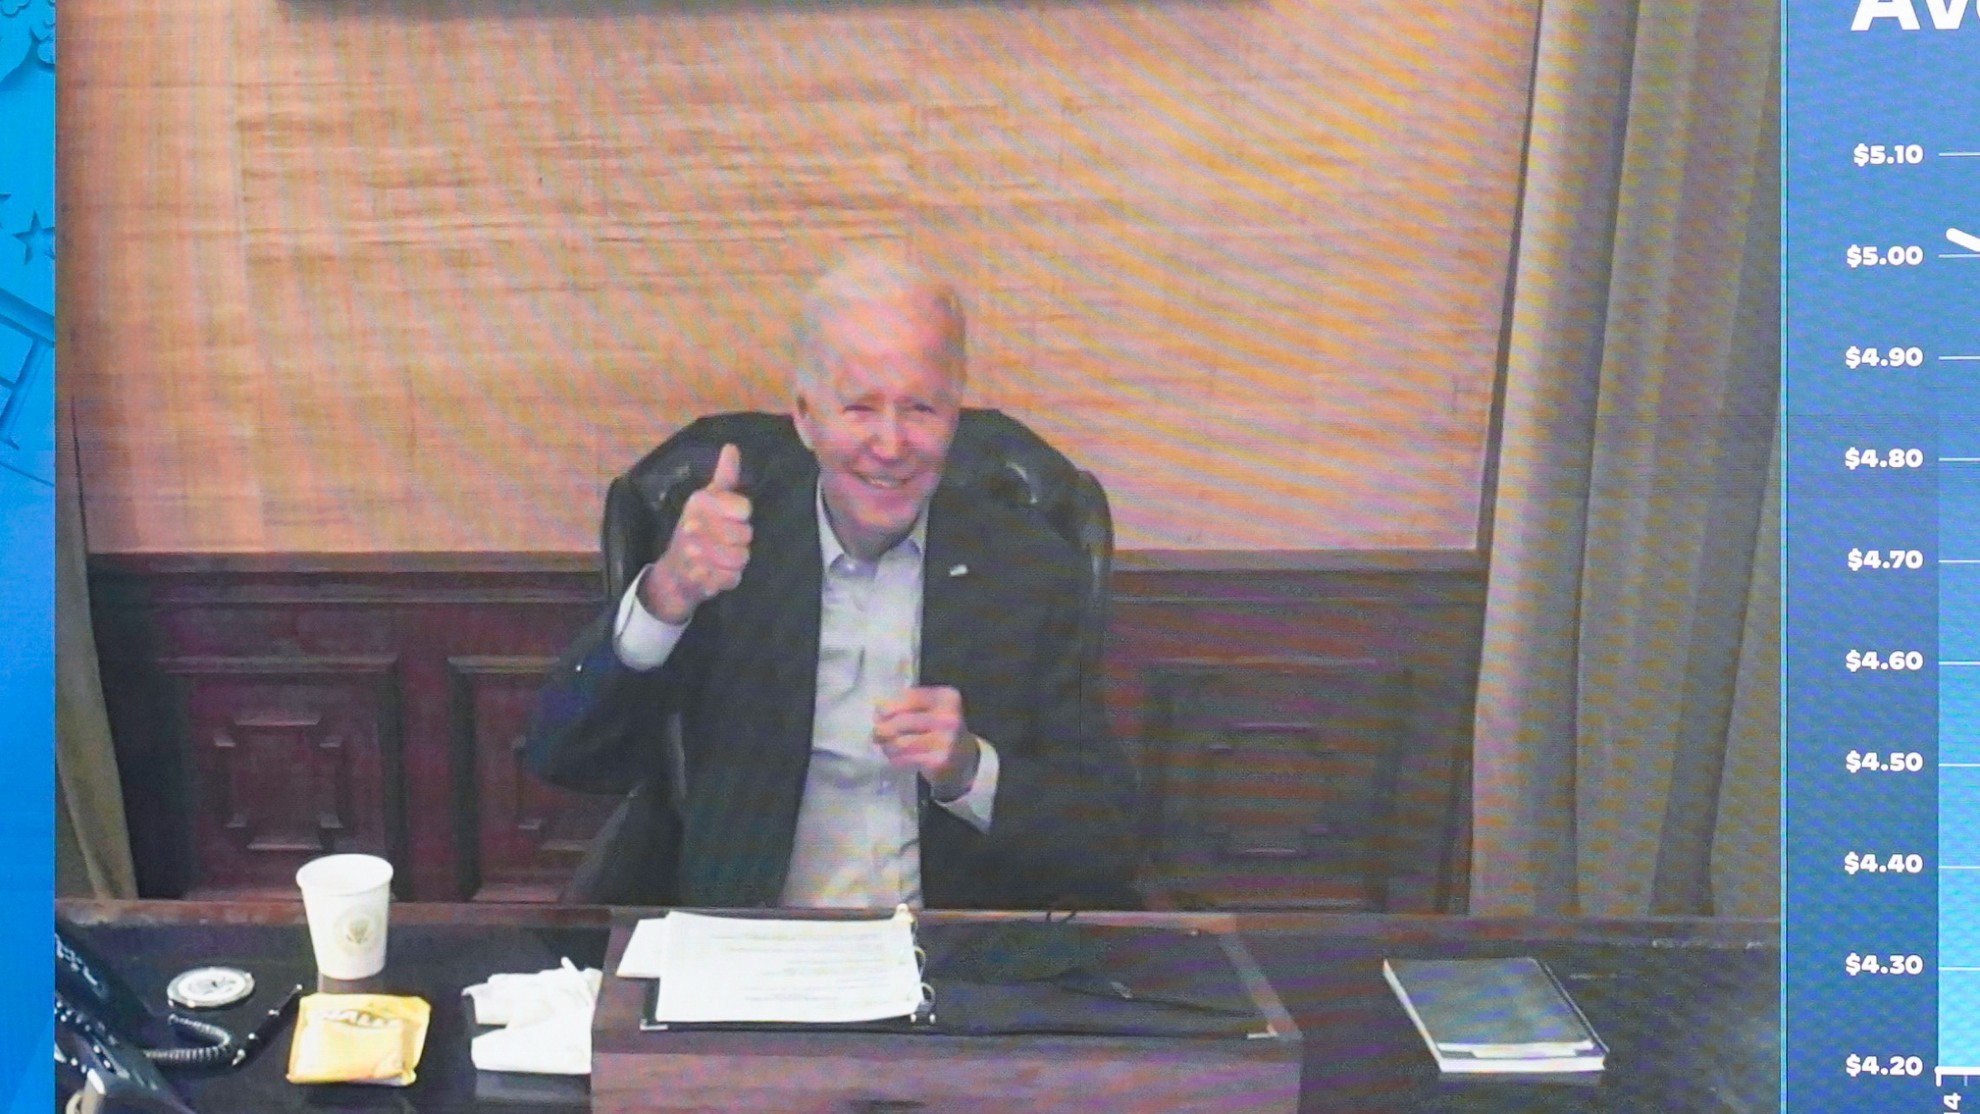 President Joe Biden gives a thumbs up after being asked by members of the media how he is feeling.